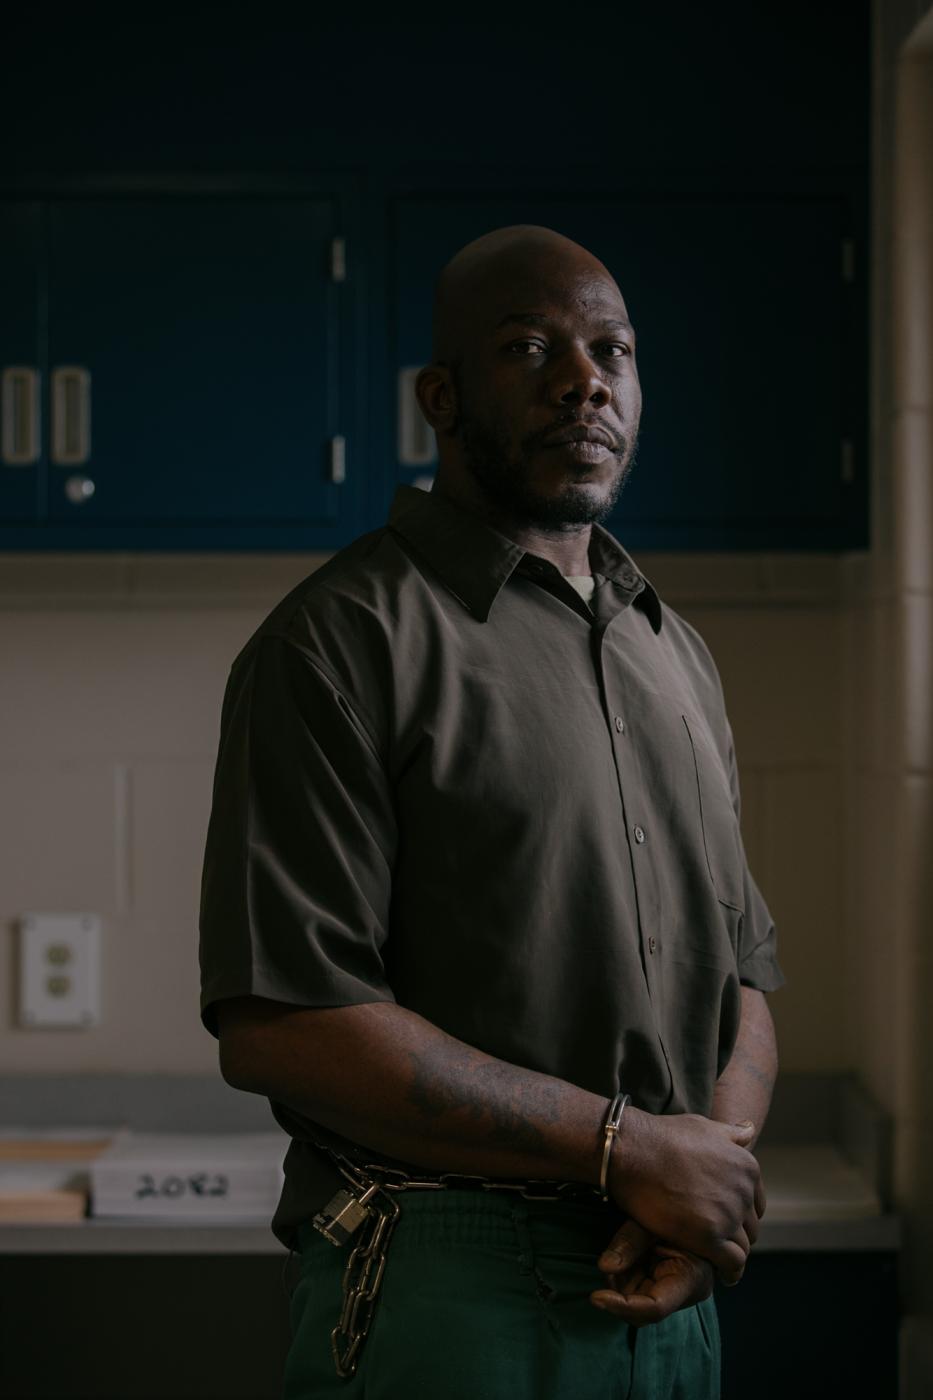 Michael J. Jones, an inmate at ...Heights, for The New York Times